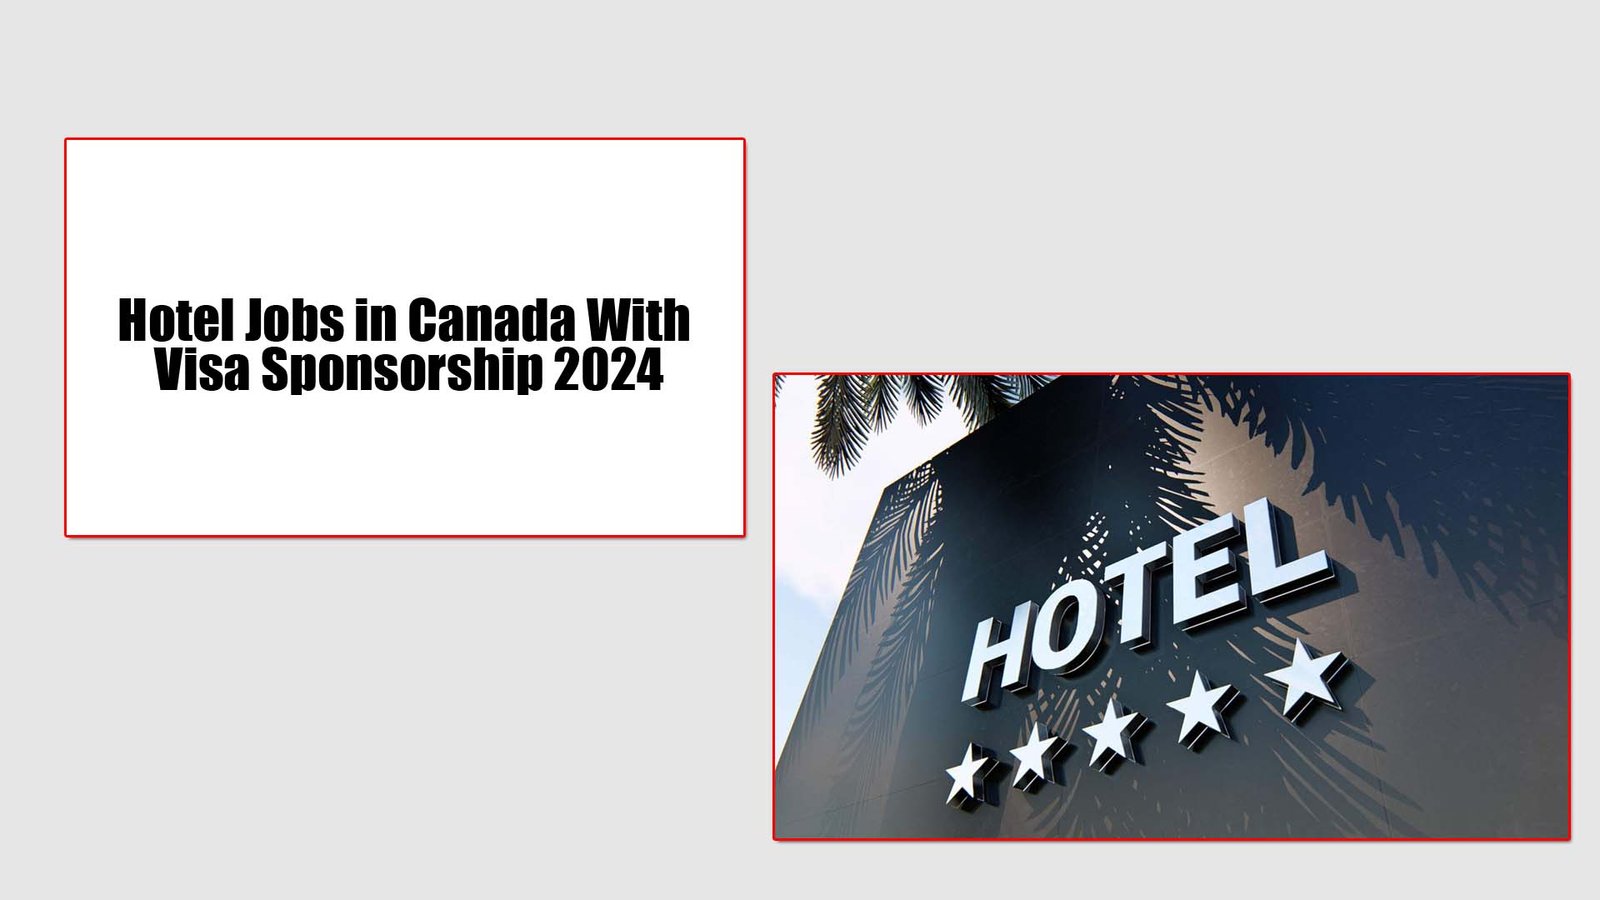 Hotel Jobs in Canada With Visa Sponsorship 2024